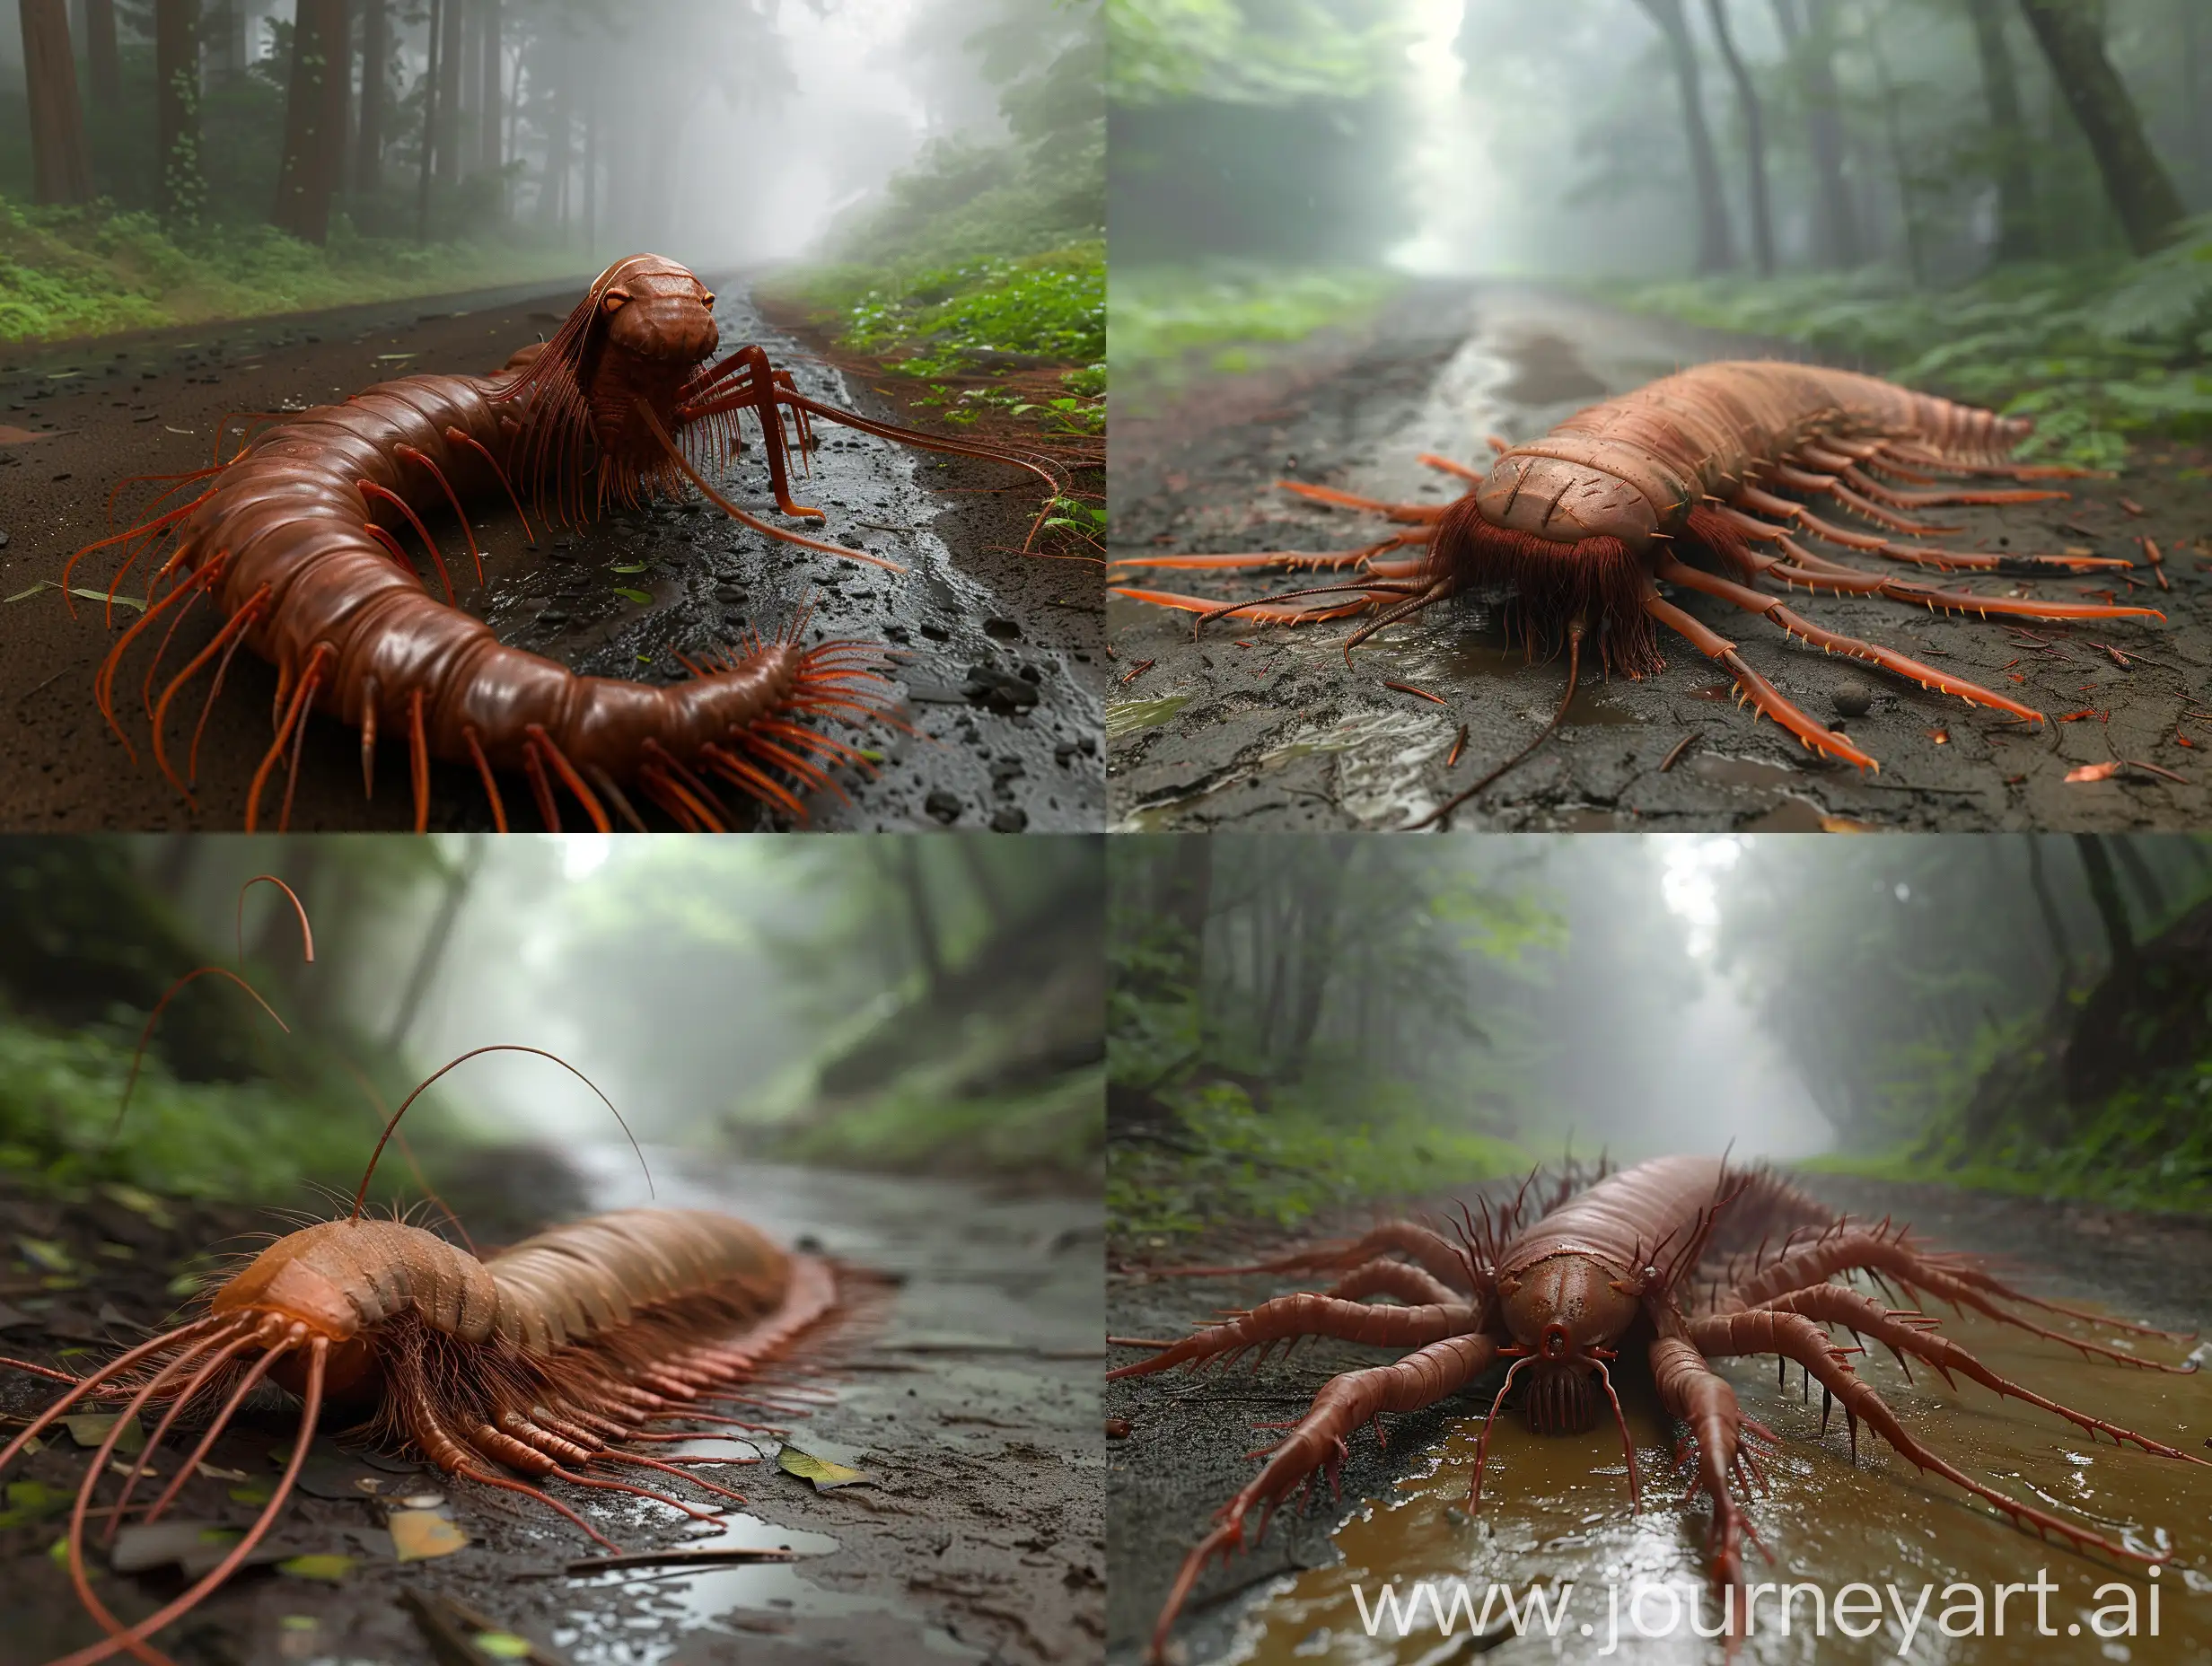 Japanese yokai ((( The giant centipede has the face of a Kabuki and extremely long hair )))scene, bird's eye view, The body is flat and reddish-brown in color, tokyo forest ((( far view, Slippery mud road)), Outdoor, Tilt, Nature, Photography, Light, Octane rendering, cinematic, realism, Using (((imagination))) to craft a photorealistic representation of an unusual fantasy dream, Amazing, shocking, Mysterious, Contrasty, gorgeous, evil, darkness, fog, decayed, ivory colors, Memphis, The UHD camera captures every detail of this moment, highlighting the colors and textures.
